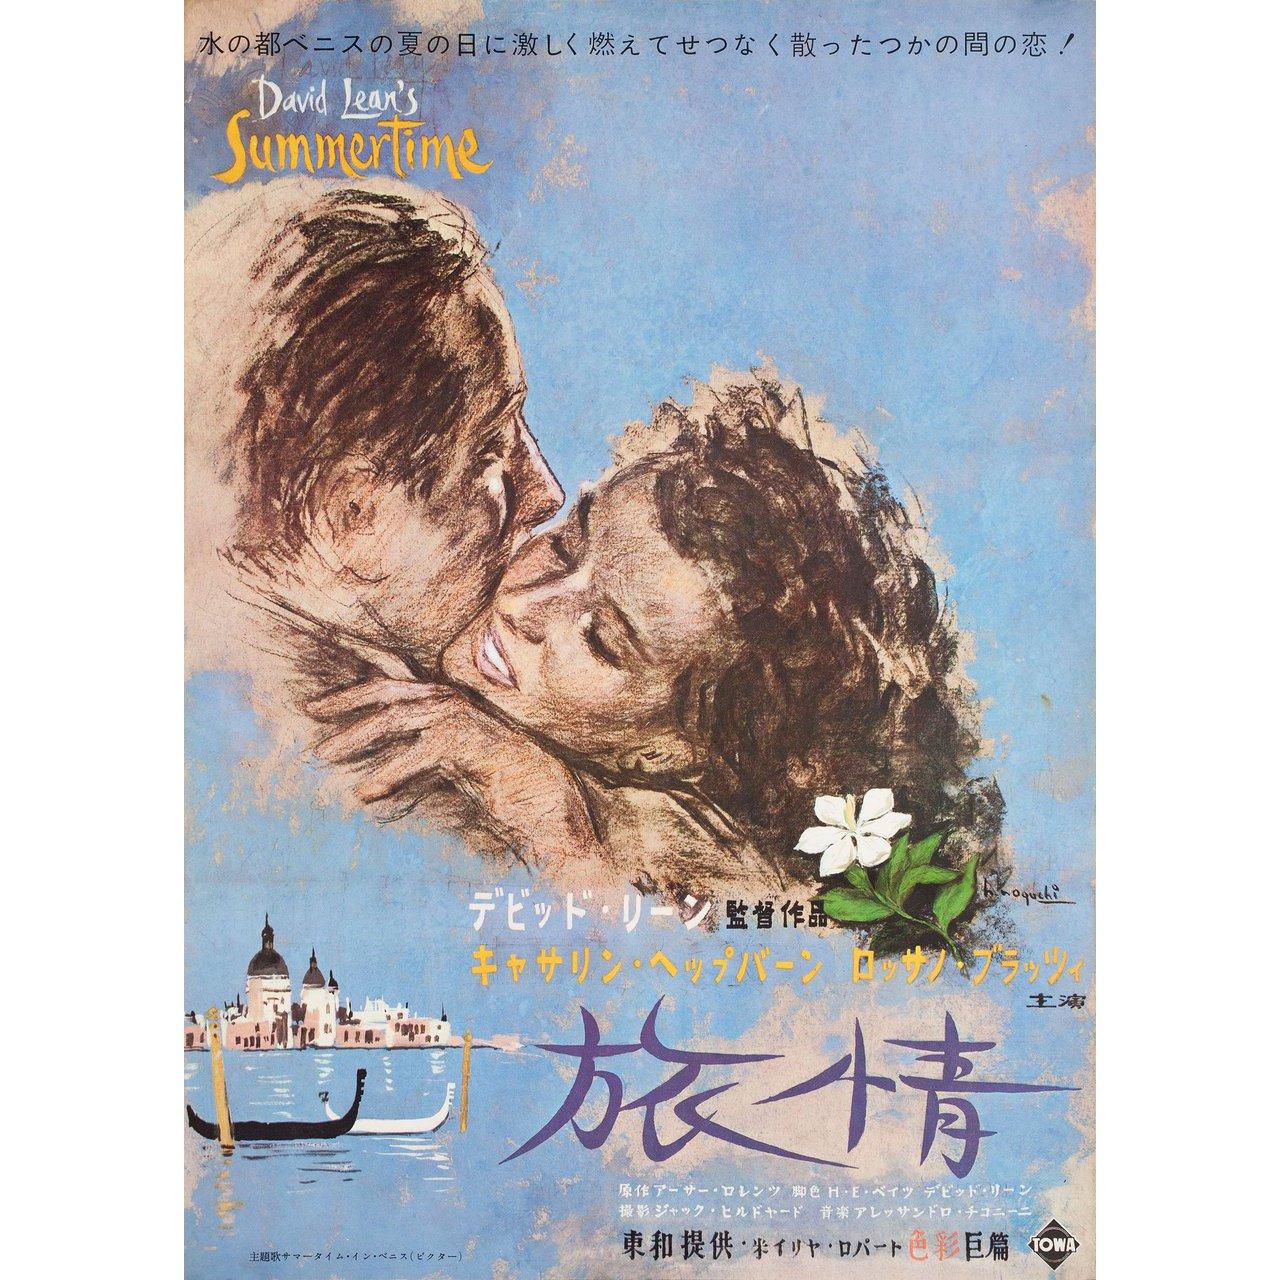 Original 1955 Japanese B2 poster by Hisamitsu Noguchi for the film Summertime directed by David Lean with Katharine Hepburn / Rossano Brazzi / Isa Miranda / Darren McGavin. Fine condition, rolled. Please note: The size is stated in inches and the